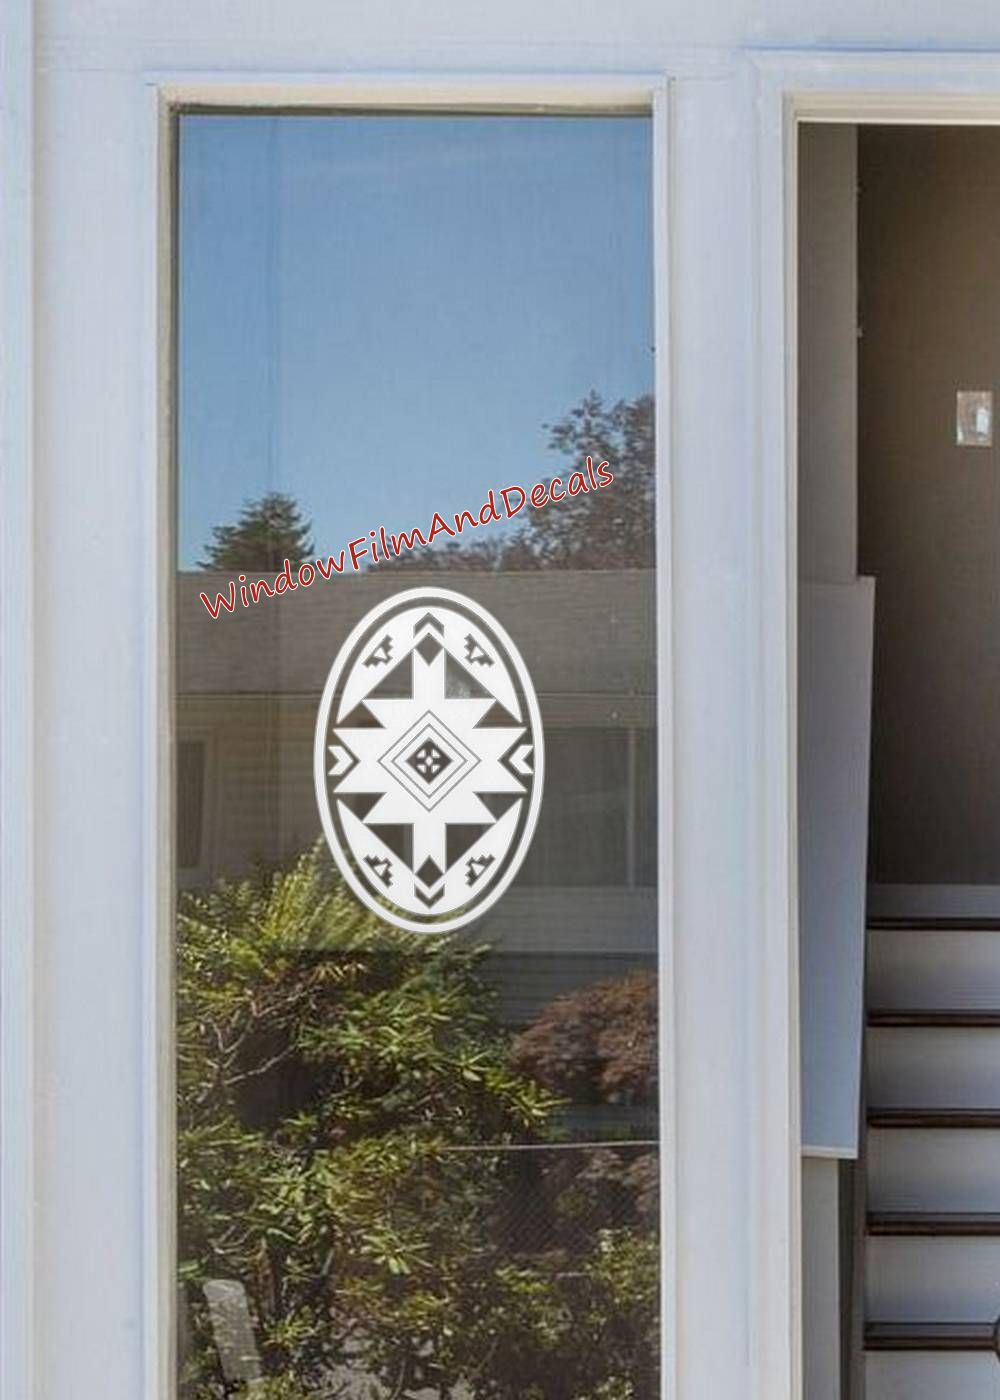 Native Oval Static Cling Window Decal - White w/Clear Design